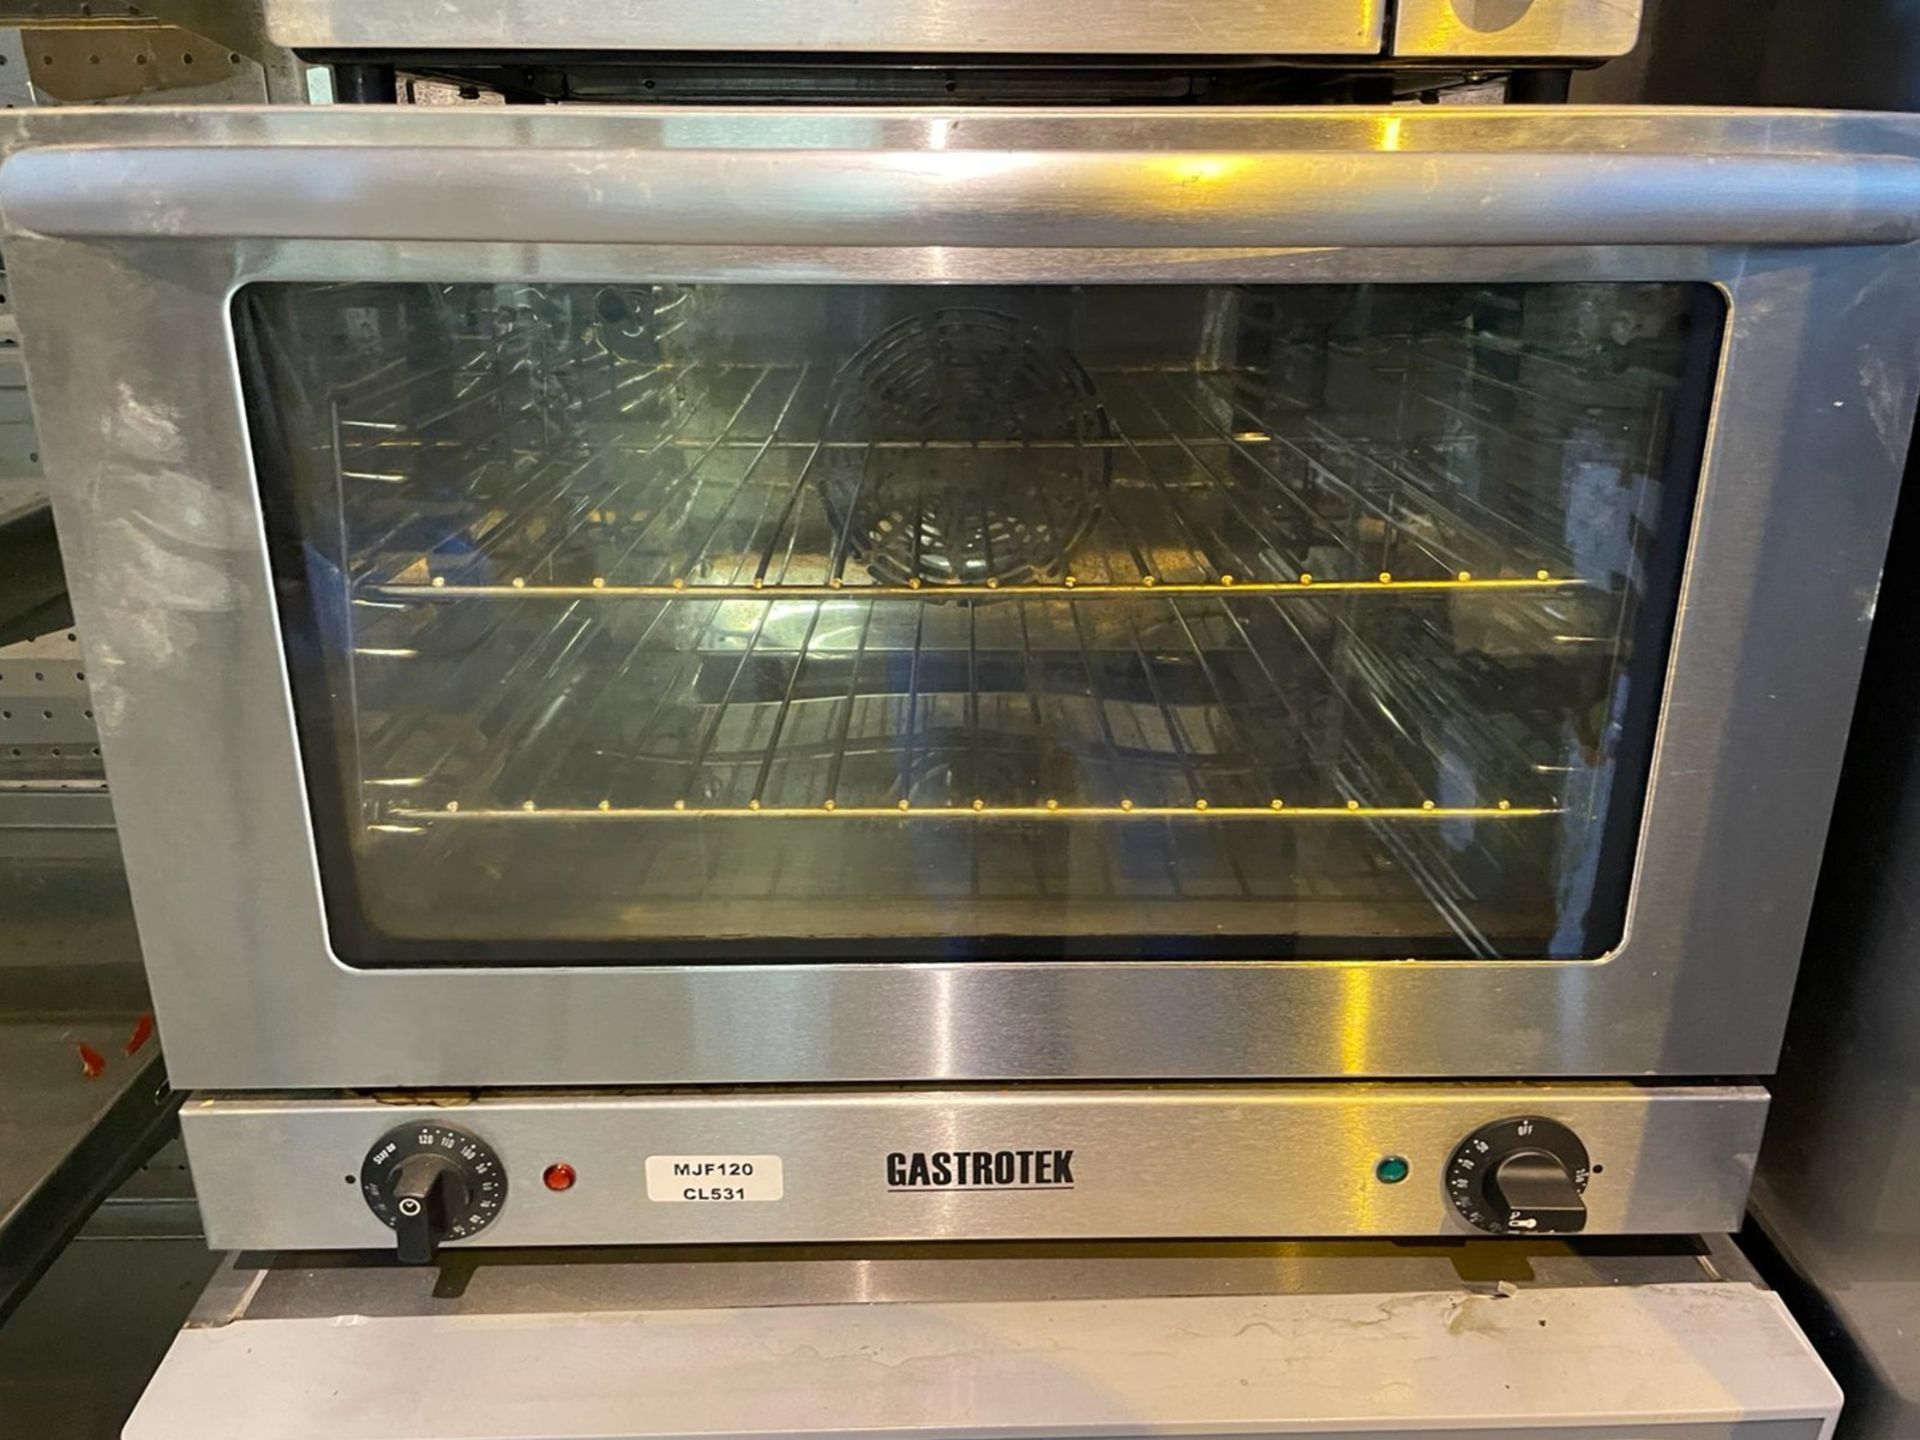 1 x Gastrotek Countertop Commercial Oven With a Stainless Steel Finish - Image 2 of 5